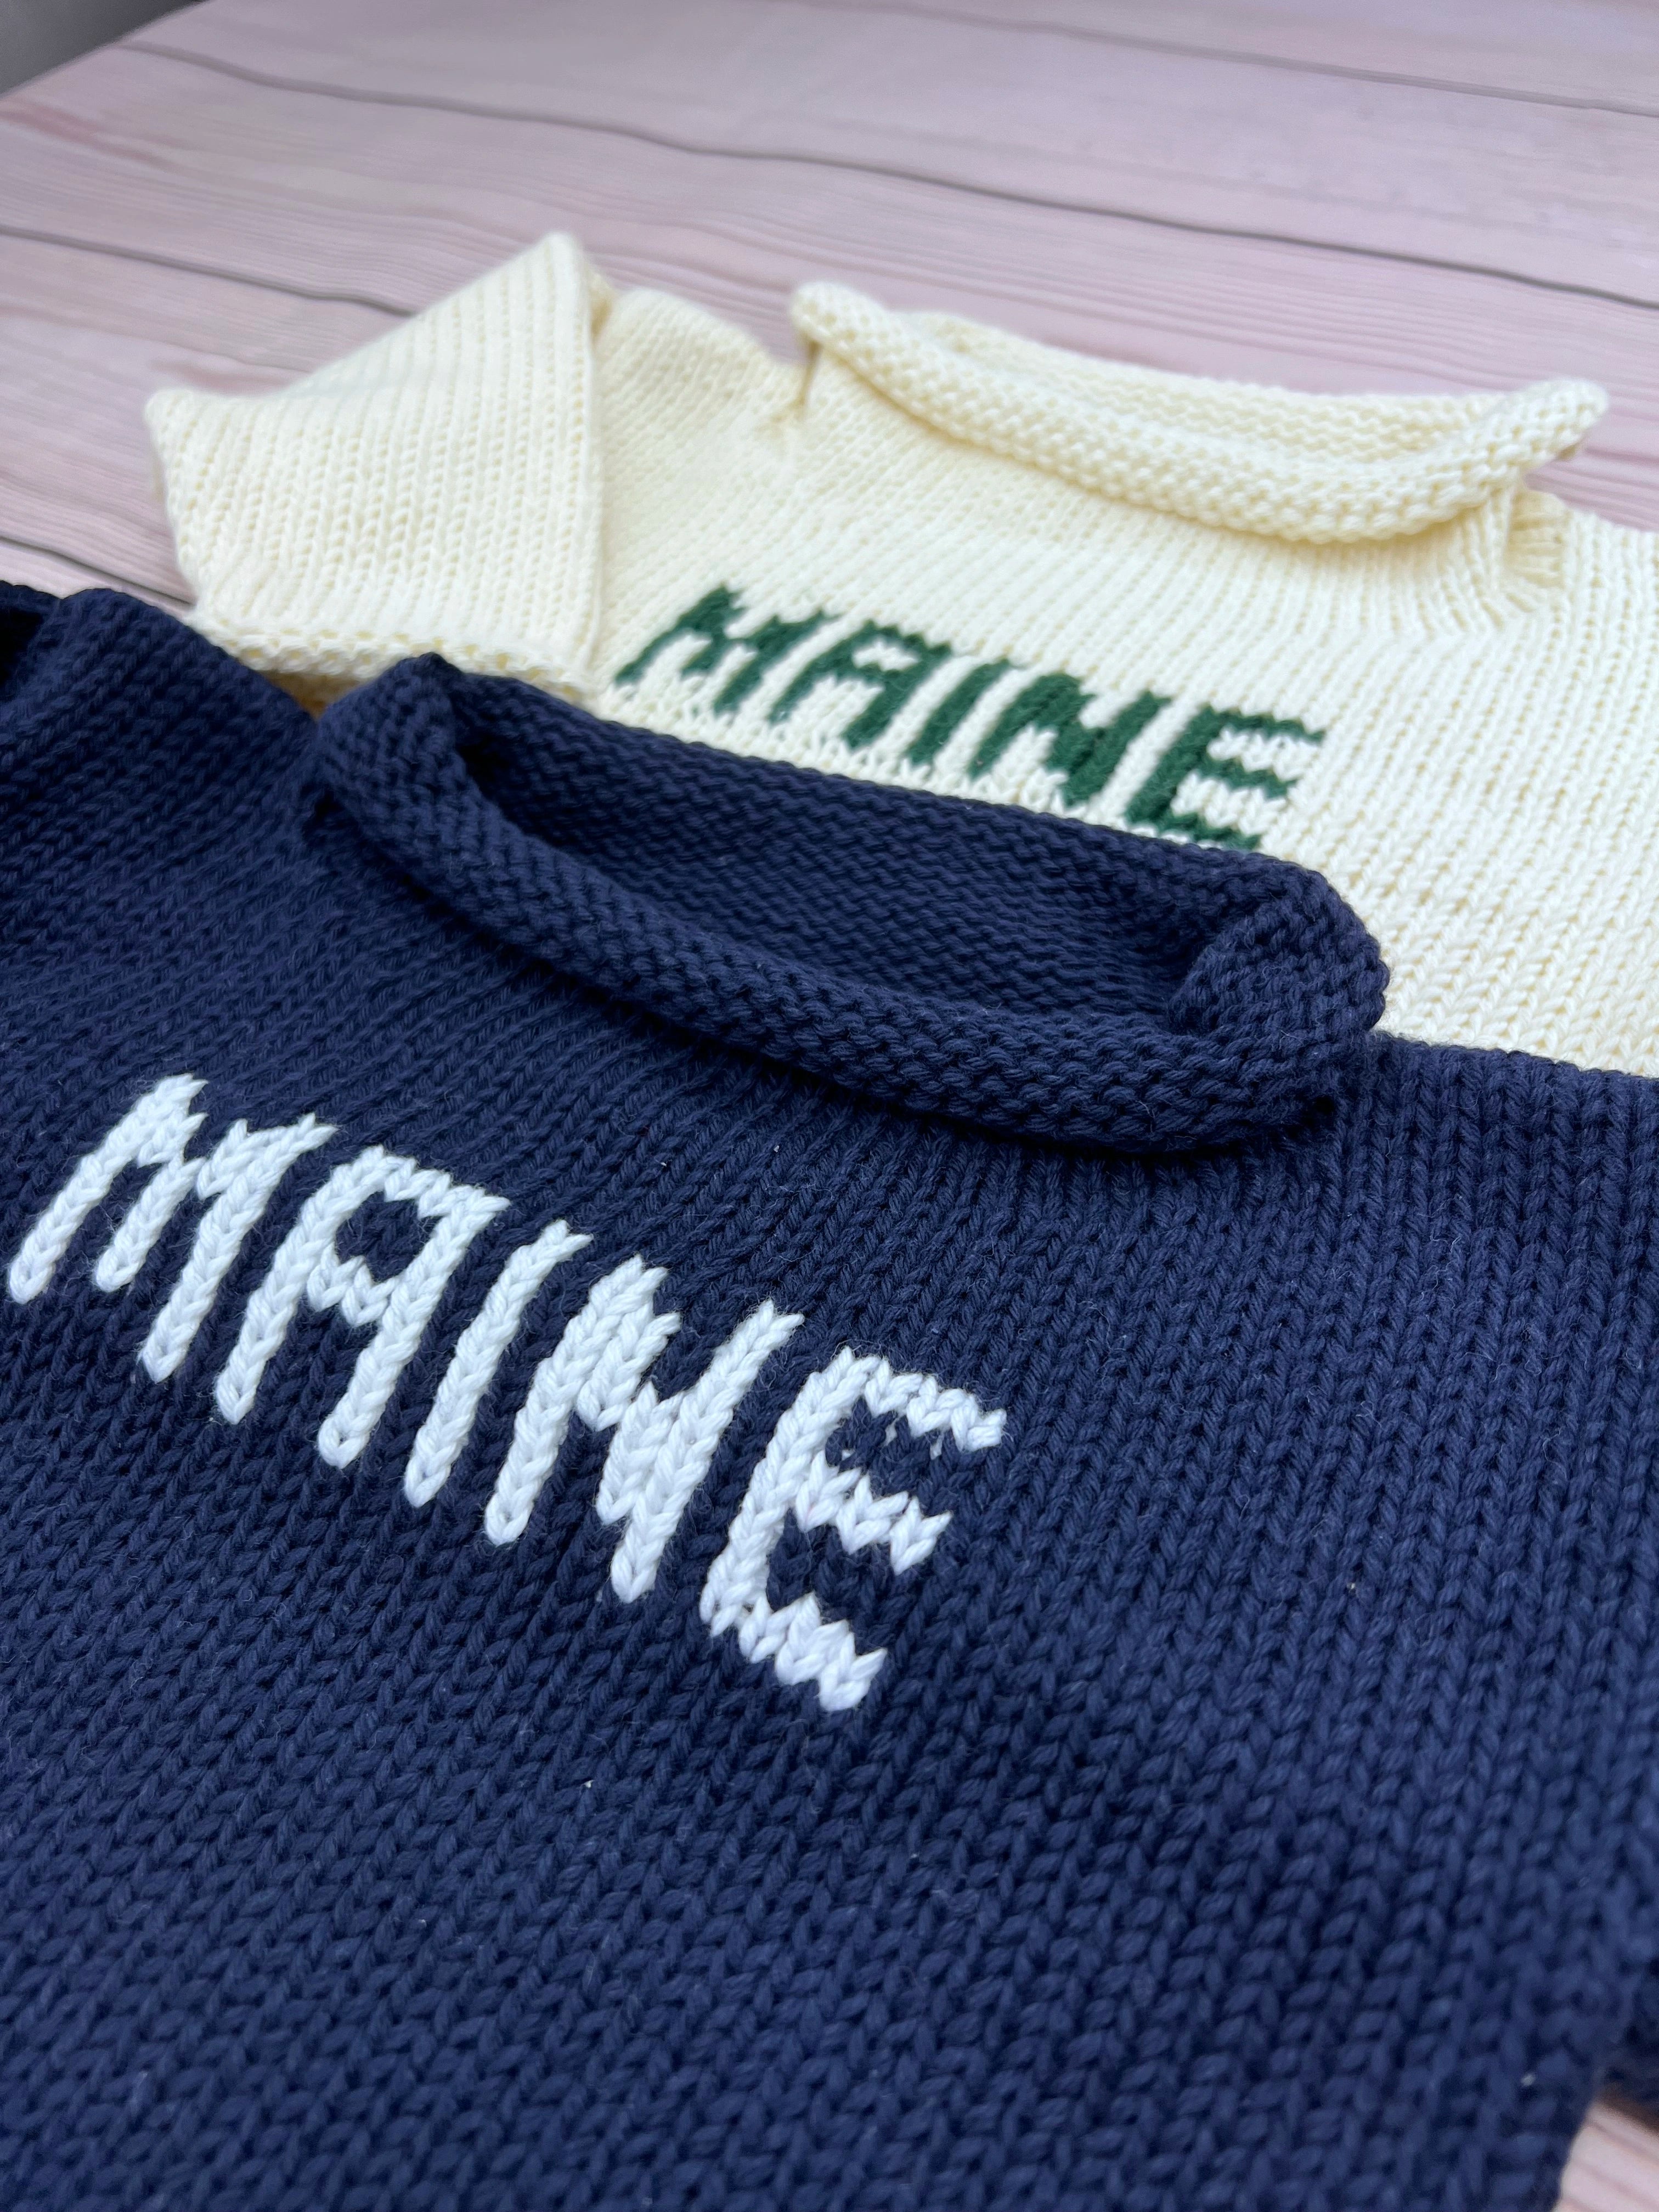 maine sweaters - one is ivory with green writing and one is navy with white writing